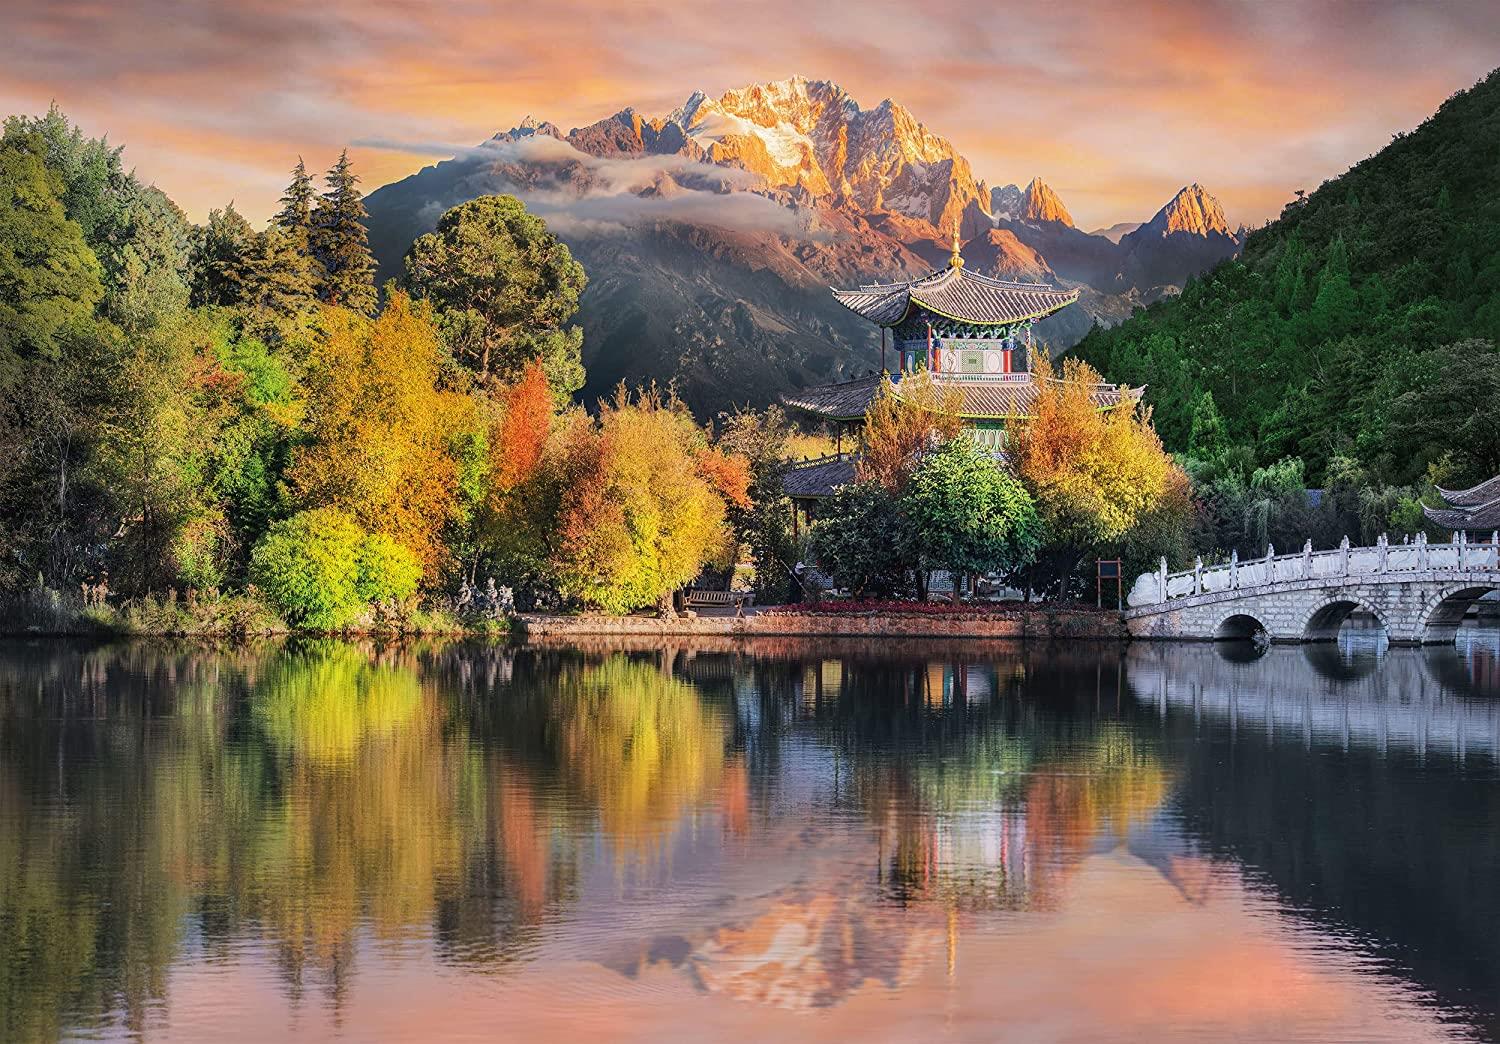 Clementoni  Lijiang View High Quality Jigsaw Puzzle (1500 Pieces)